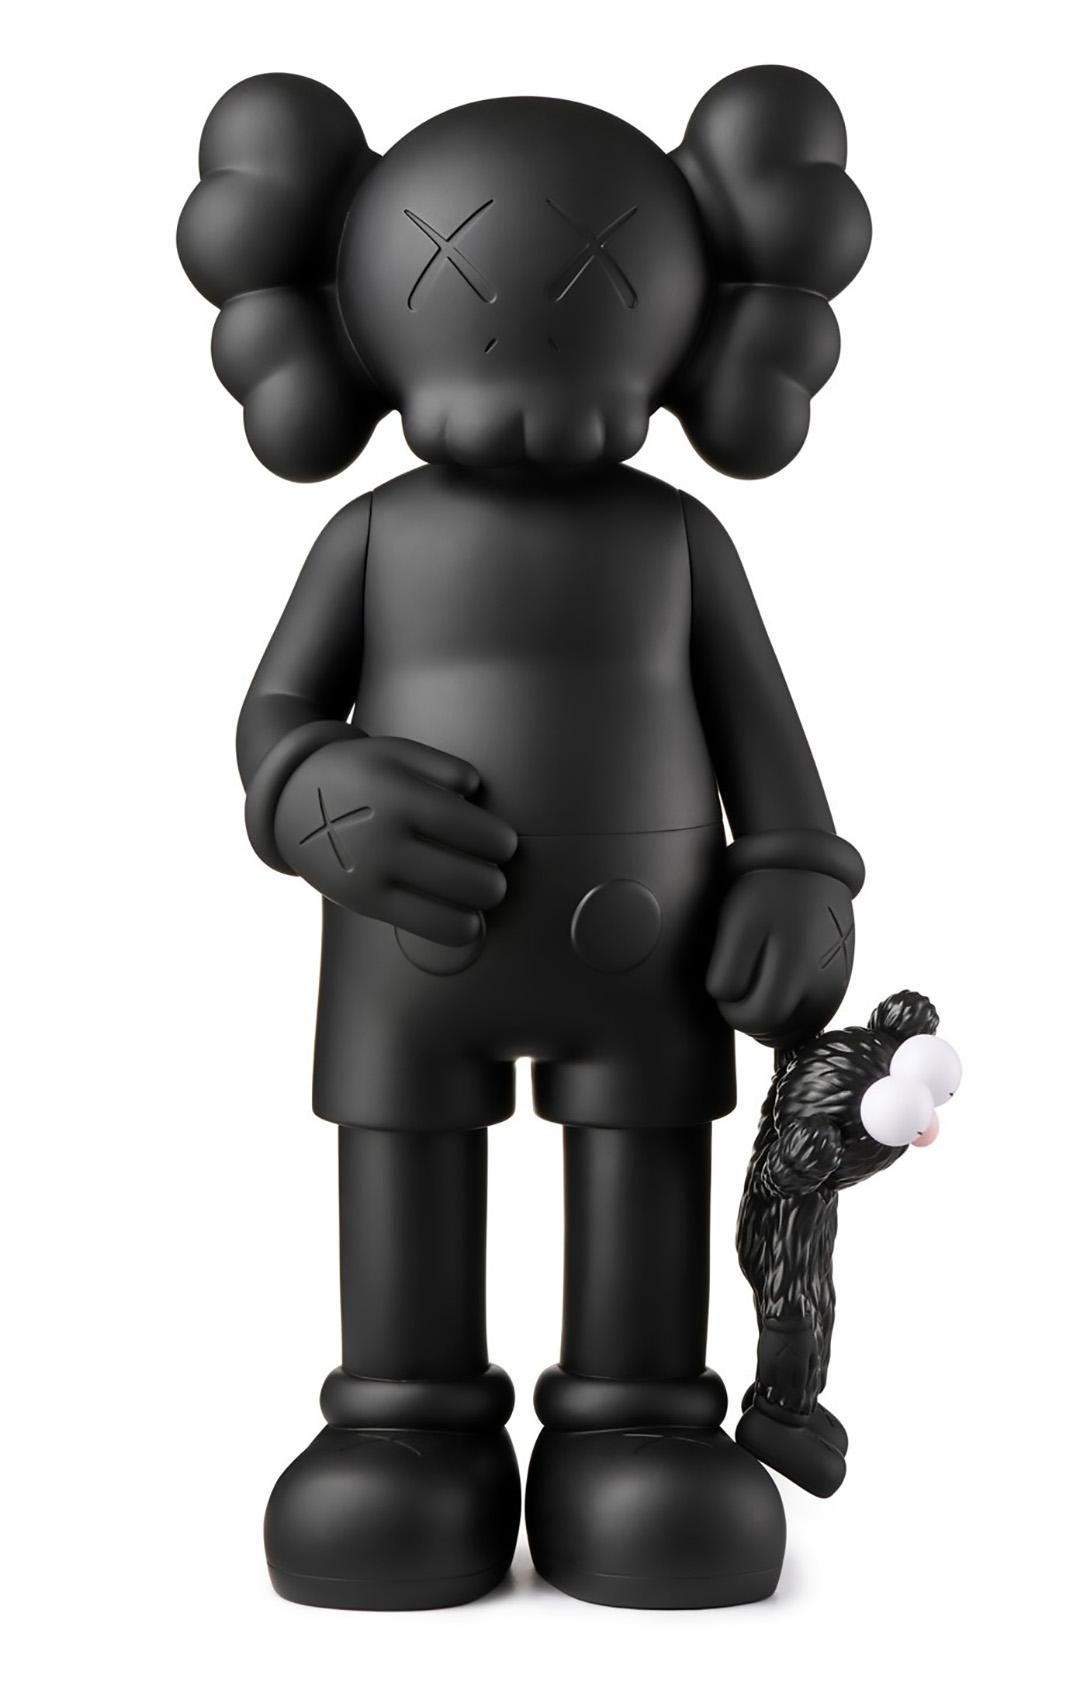 KAWS SHARE Companion (Set of 2: Black & Grey): 
Set of 2 KAWS SHARE figurative sculptures, each new & unopened in its original packaging. KAWS SHARE first appeared in 'BLACKOUT' – the first London solo exhibition by KAWS (Skarstedt London 2019). In